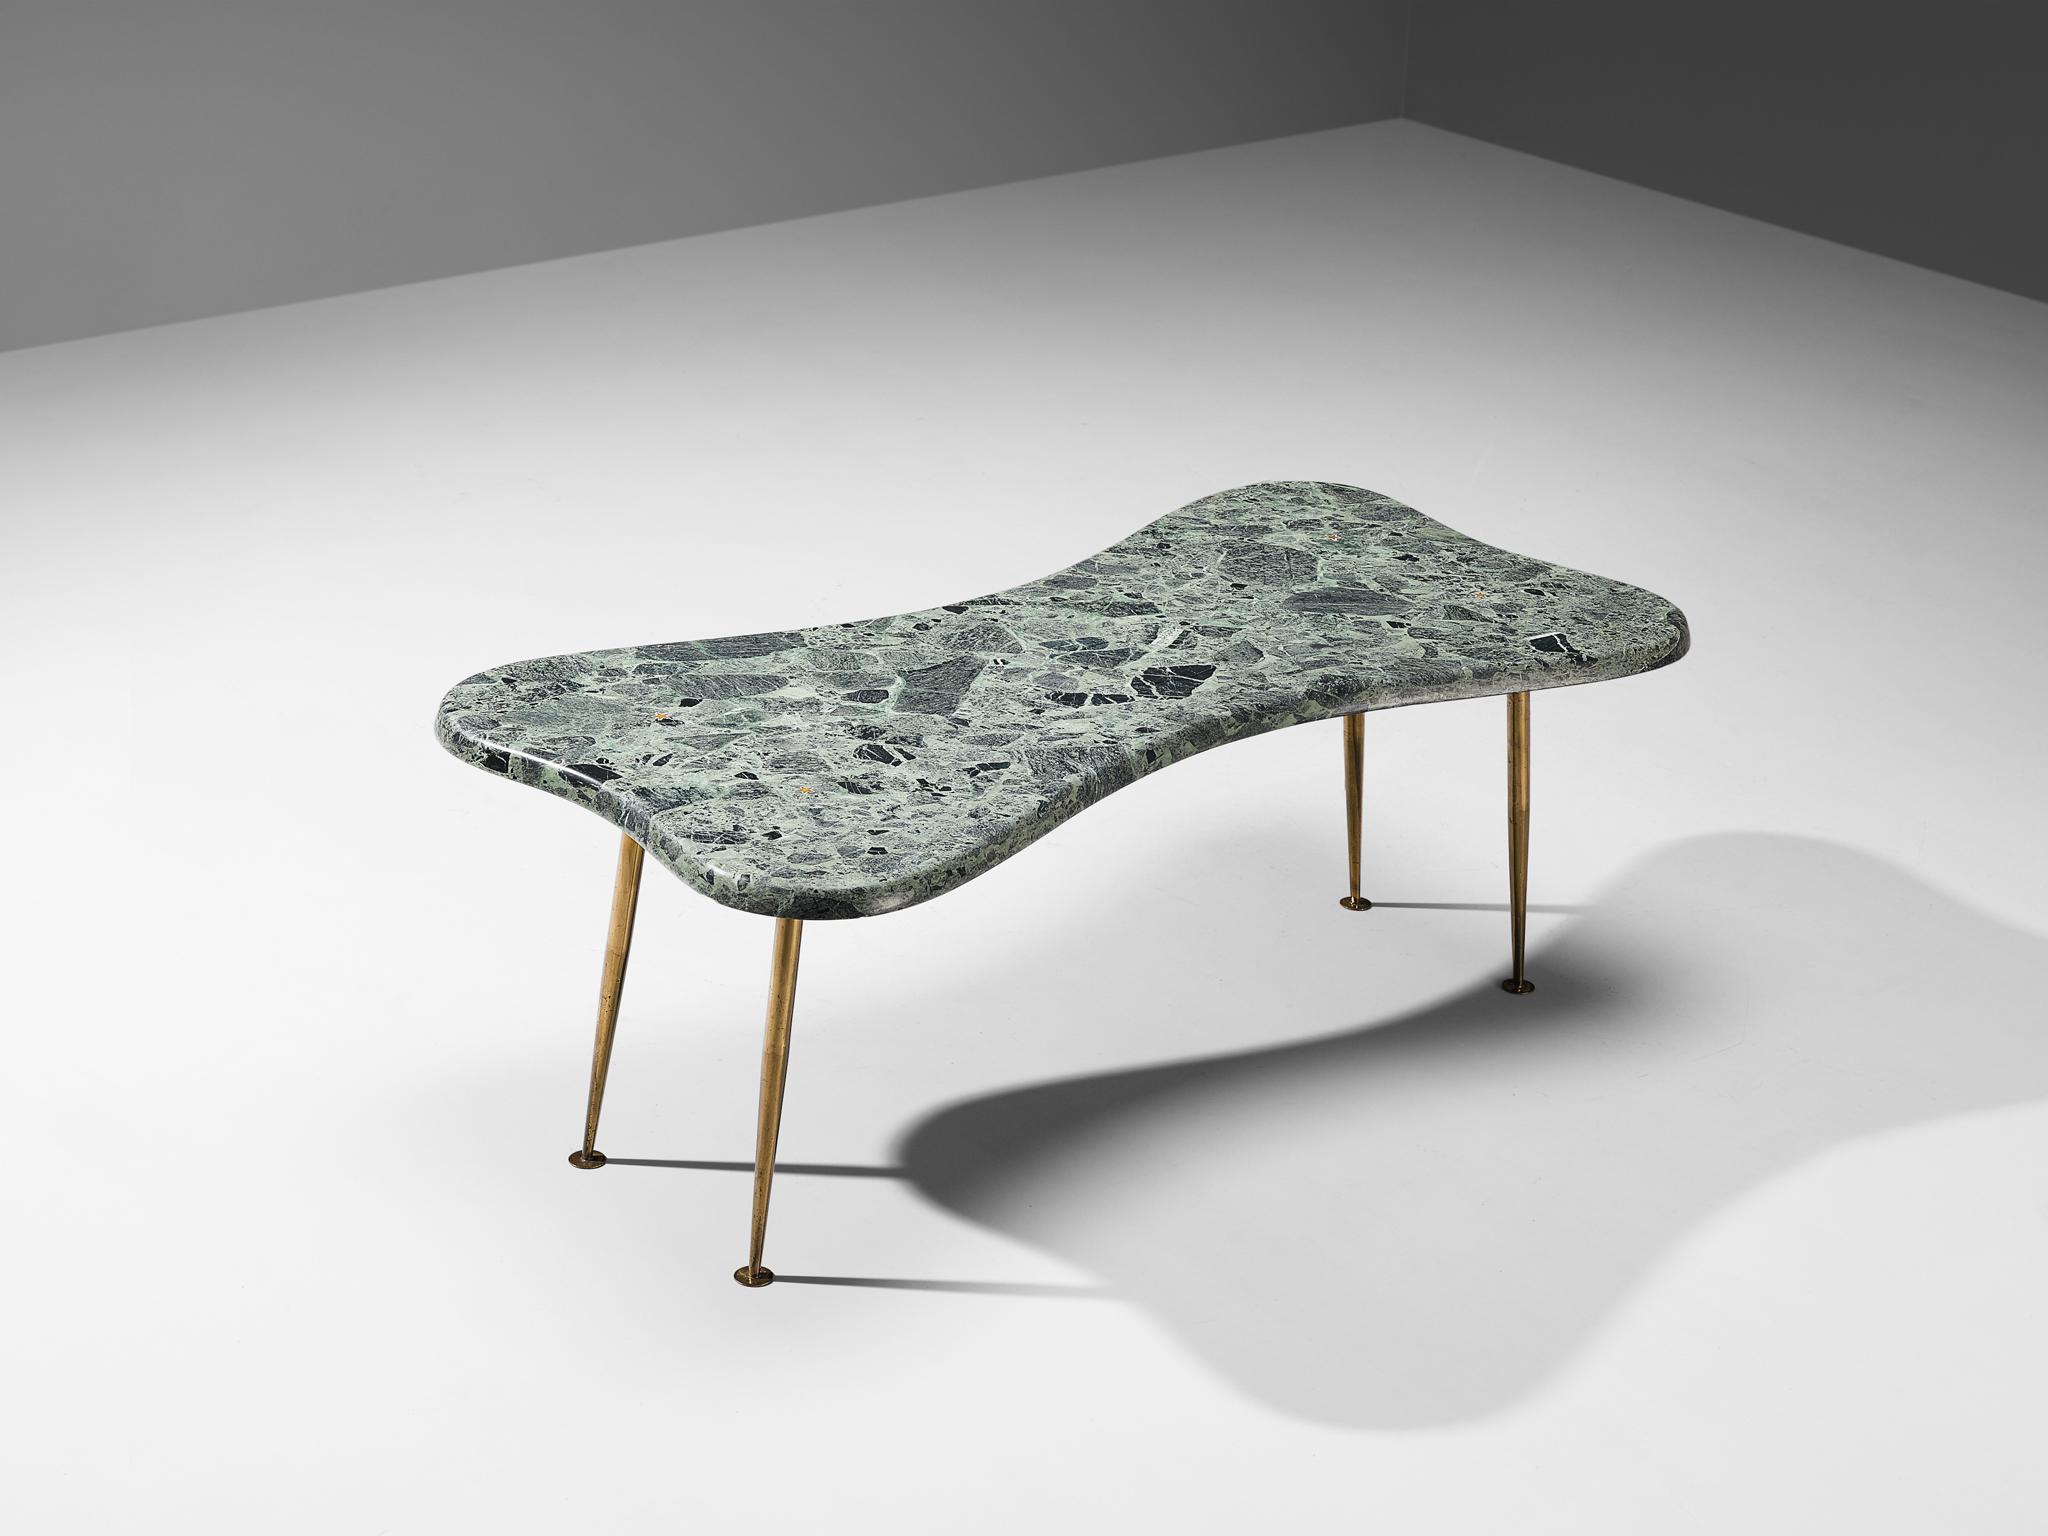 Coffee table, marble, brass, bronze Italy, 1950s

Hailing from a skilled artisan of Italy, this exceptional coffee table reflects the design principles of the Mid-Century era that rose to prominence in the 1950s. The design serves as a testament